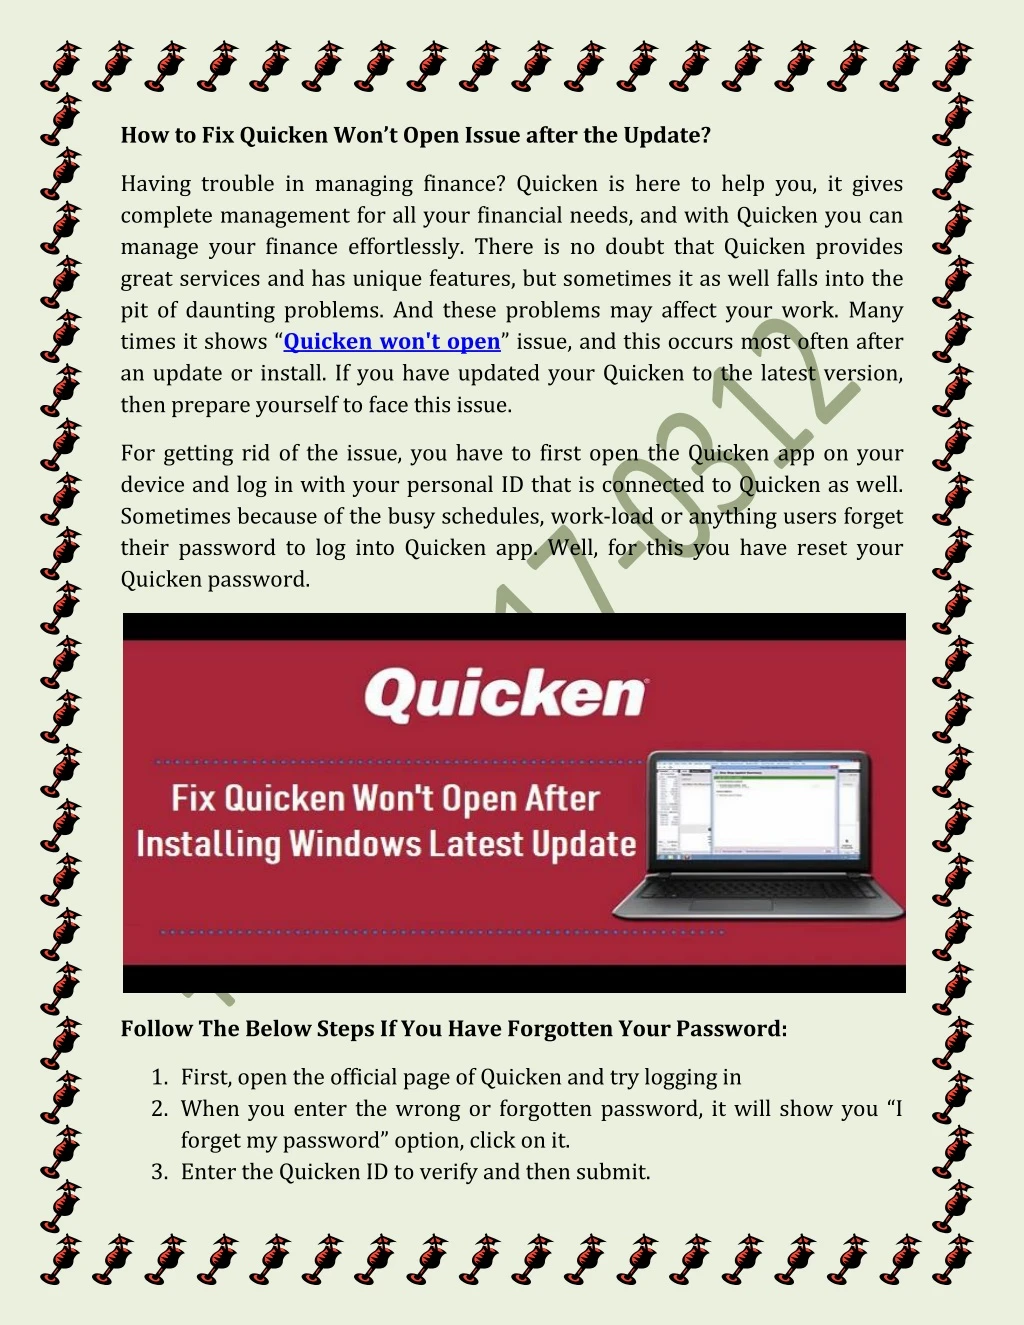 how to fix quicken won t open issue after